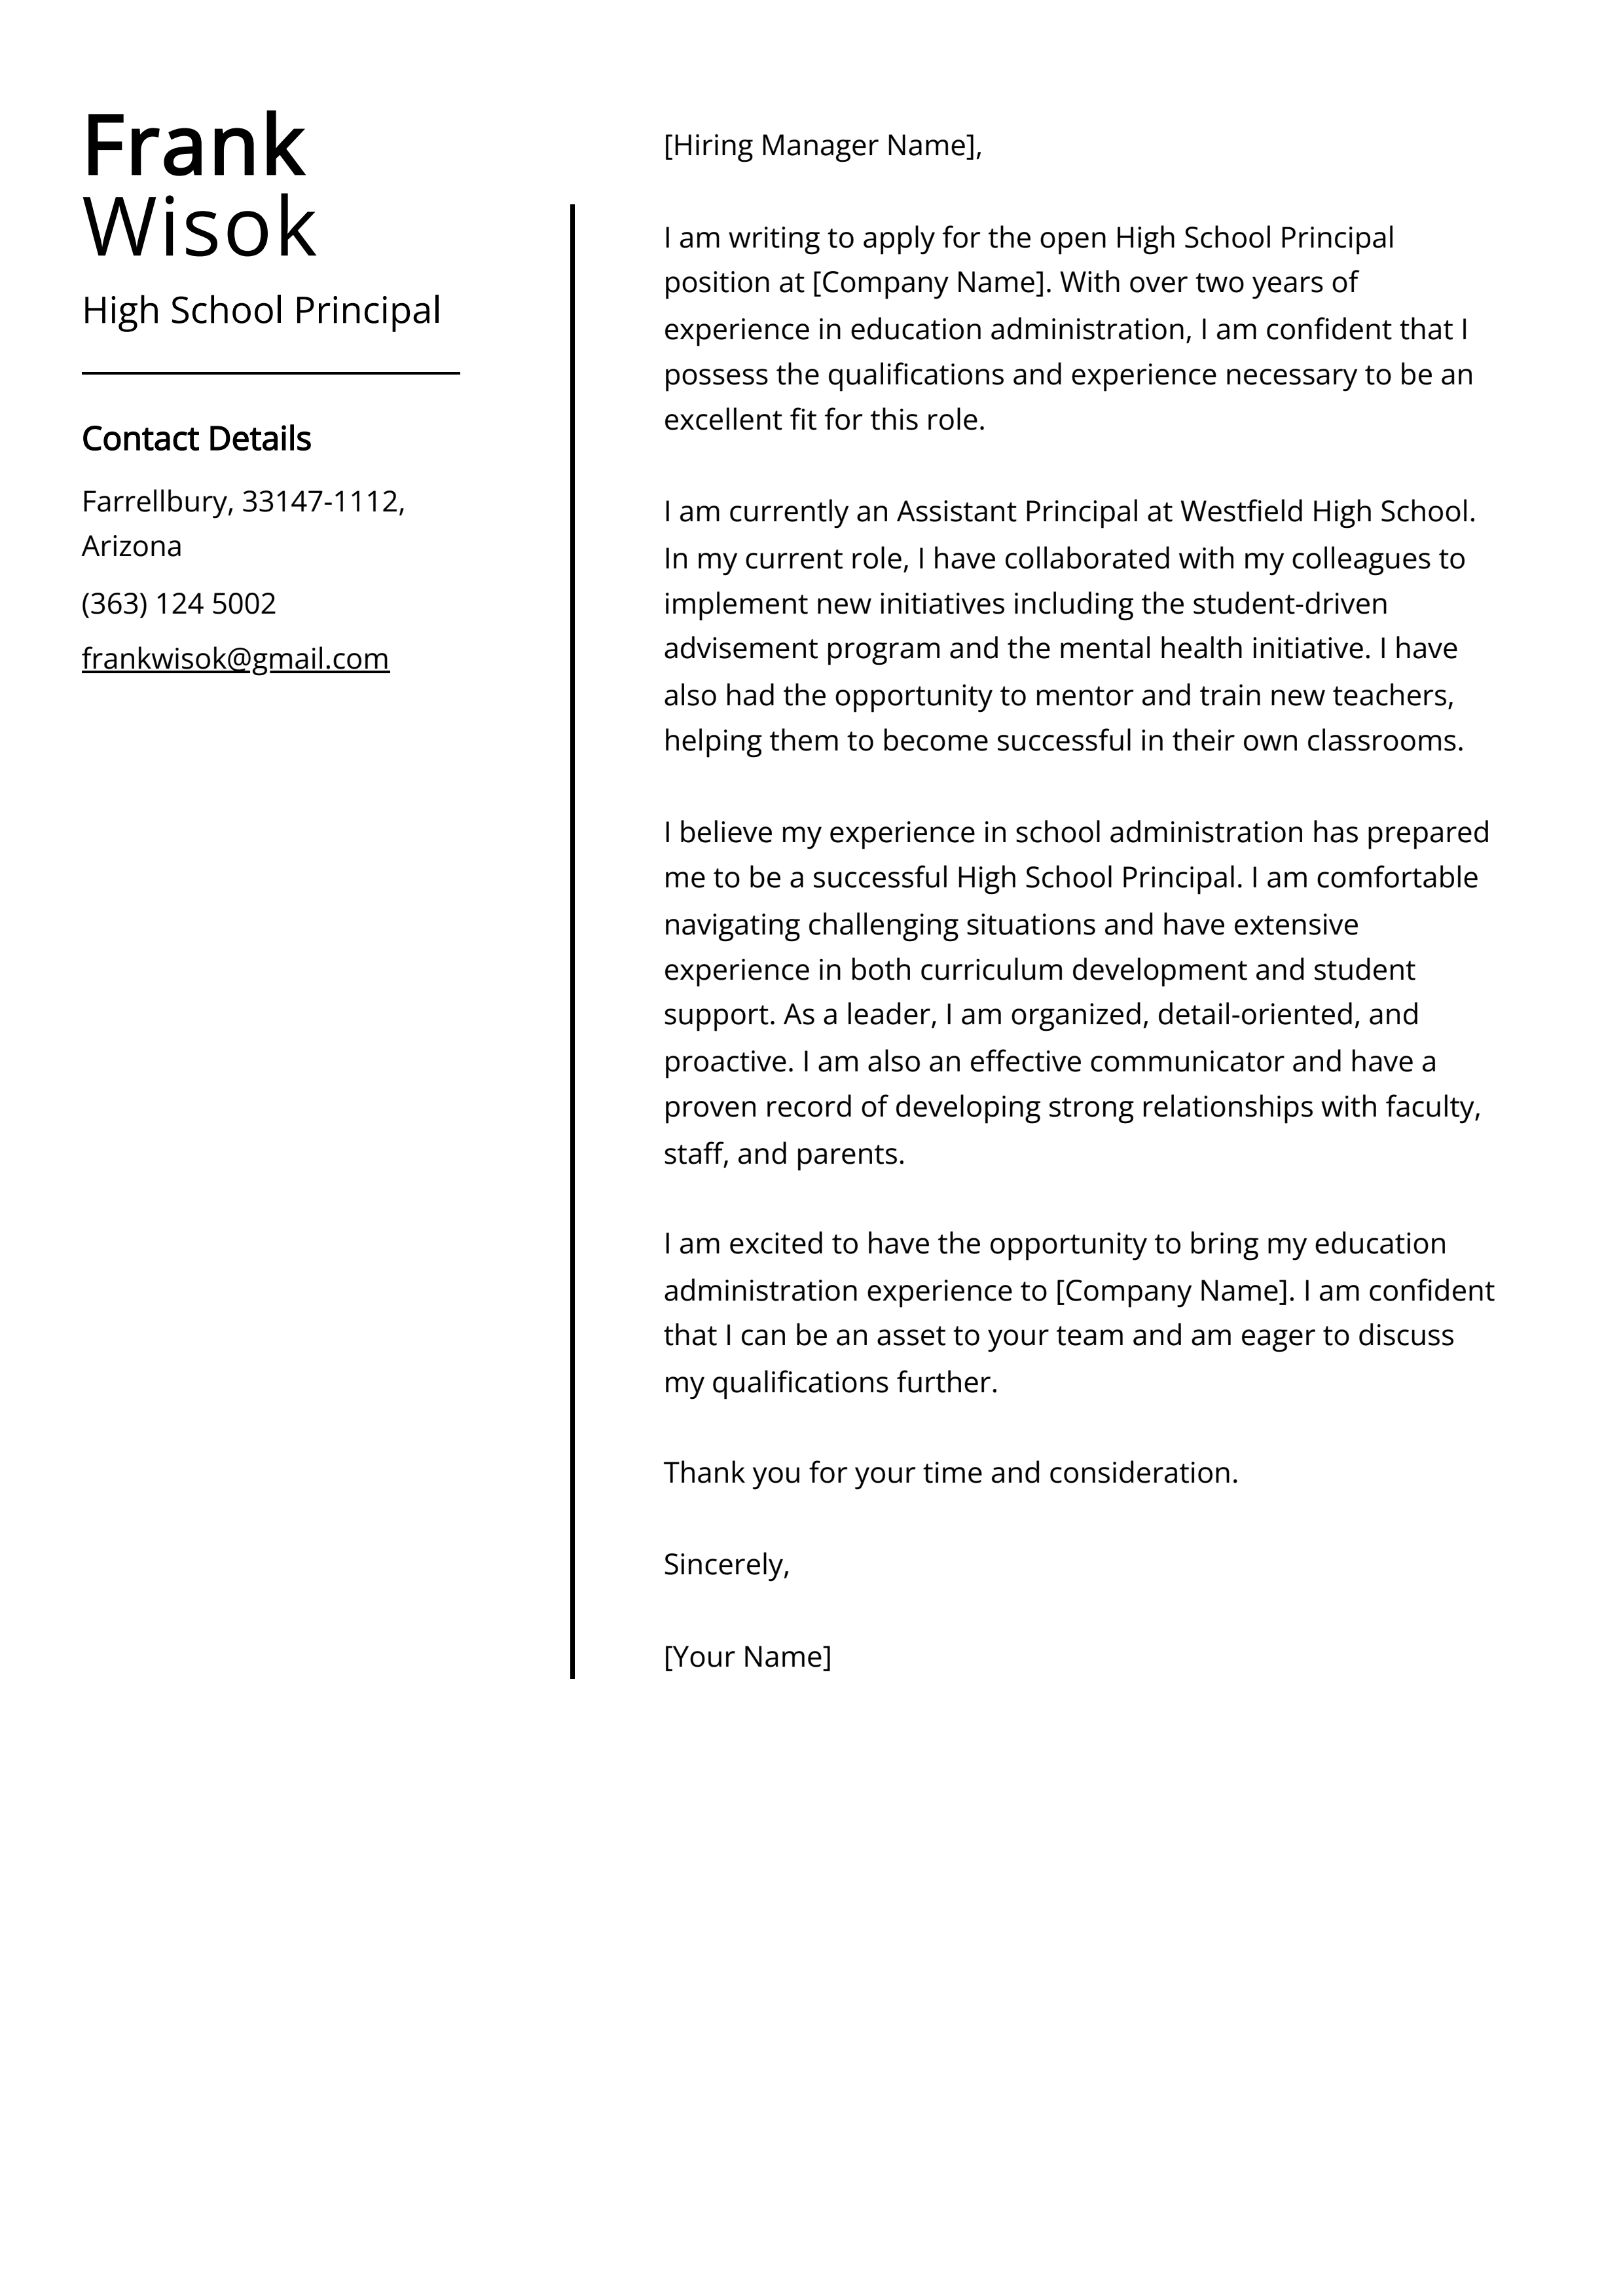 High School Principal Cover Letter Example